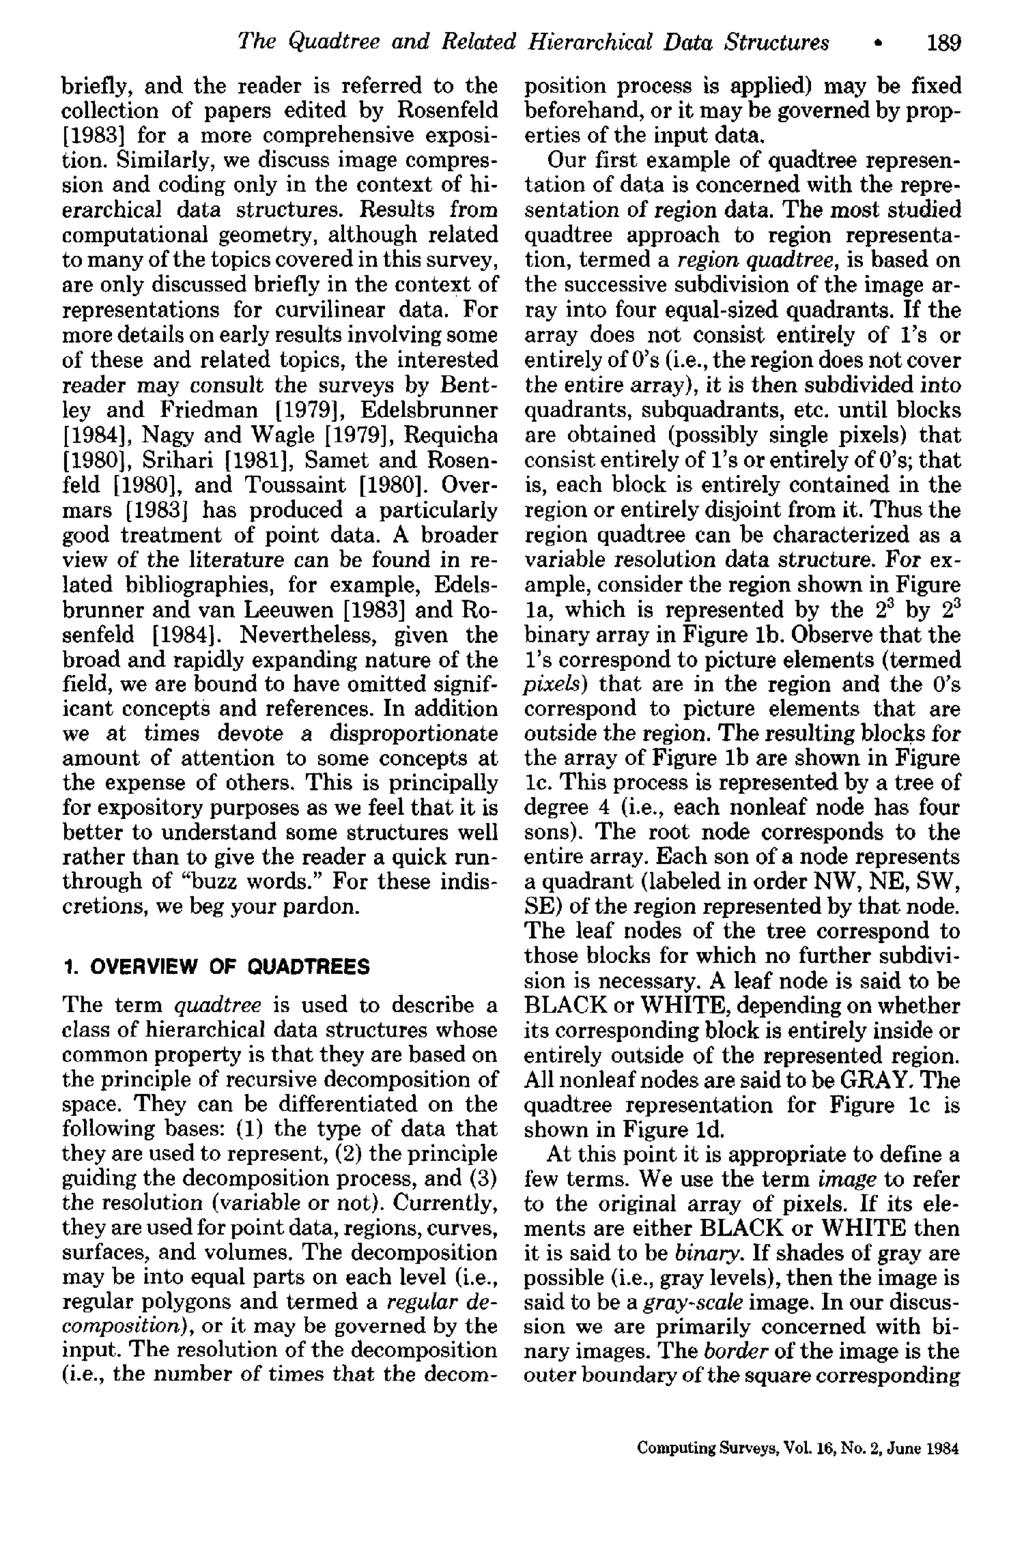 The Quadtree and Related Hierarchical Data Structures 189 briefly, and the reader is referred to the collection of papers edited by Rosenfeld [1983] for a more comprehensive exposition.